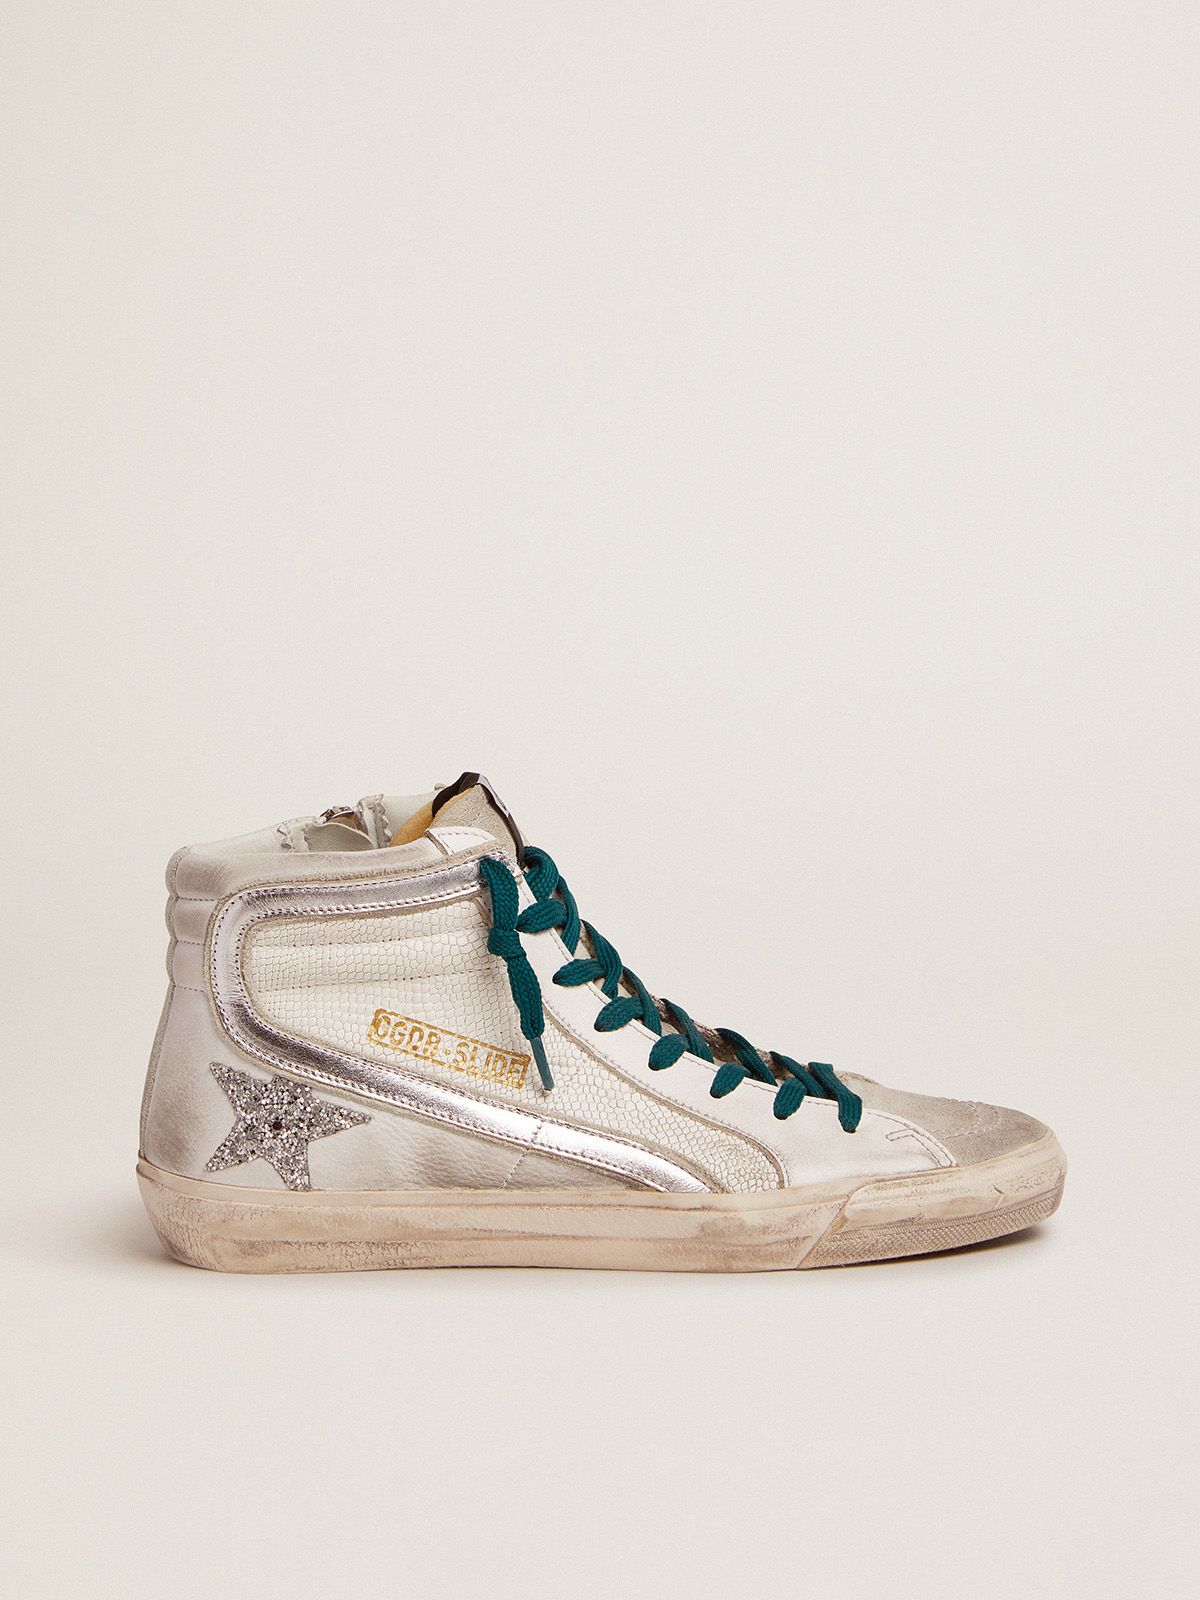 golden goose and snake-print Slide leather glitter silver with upper sneakers star